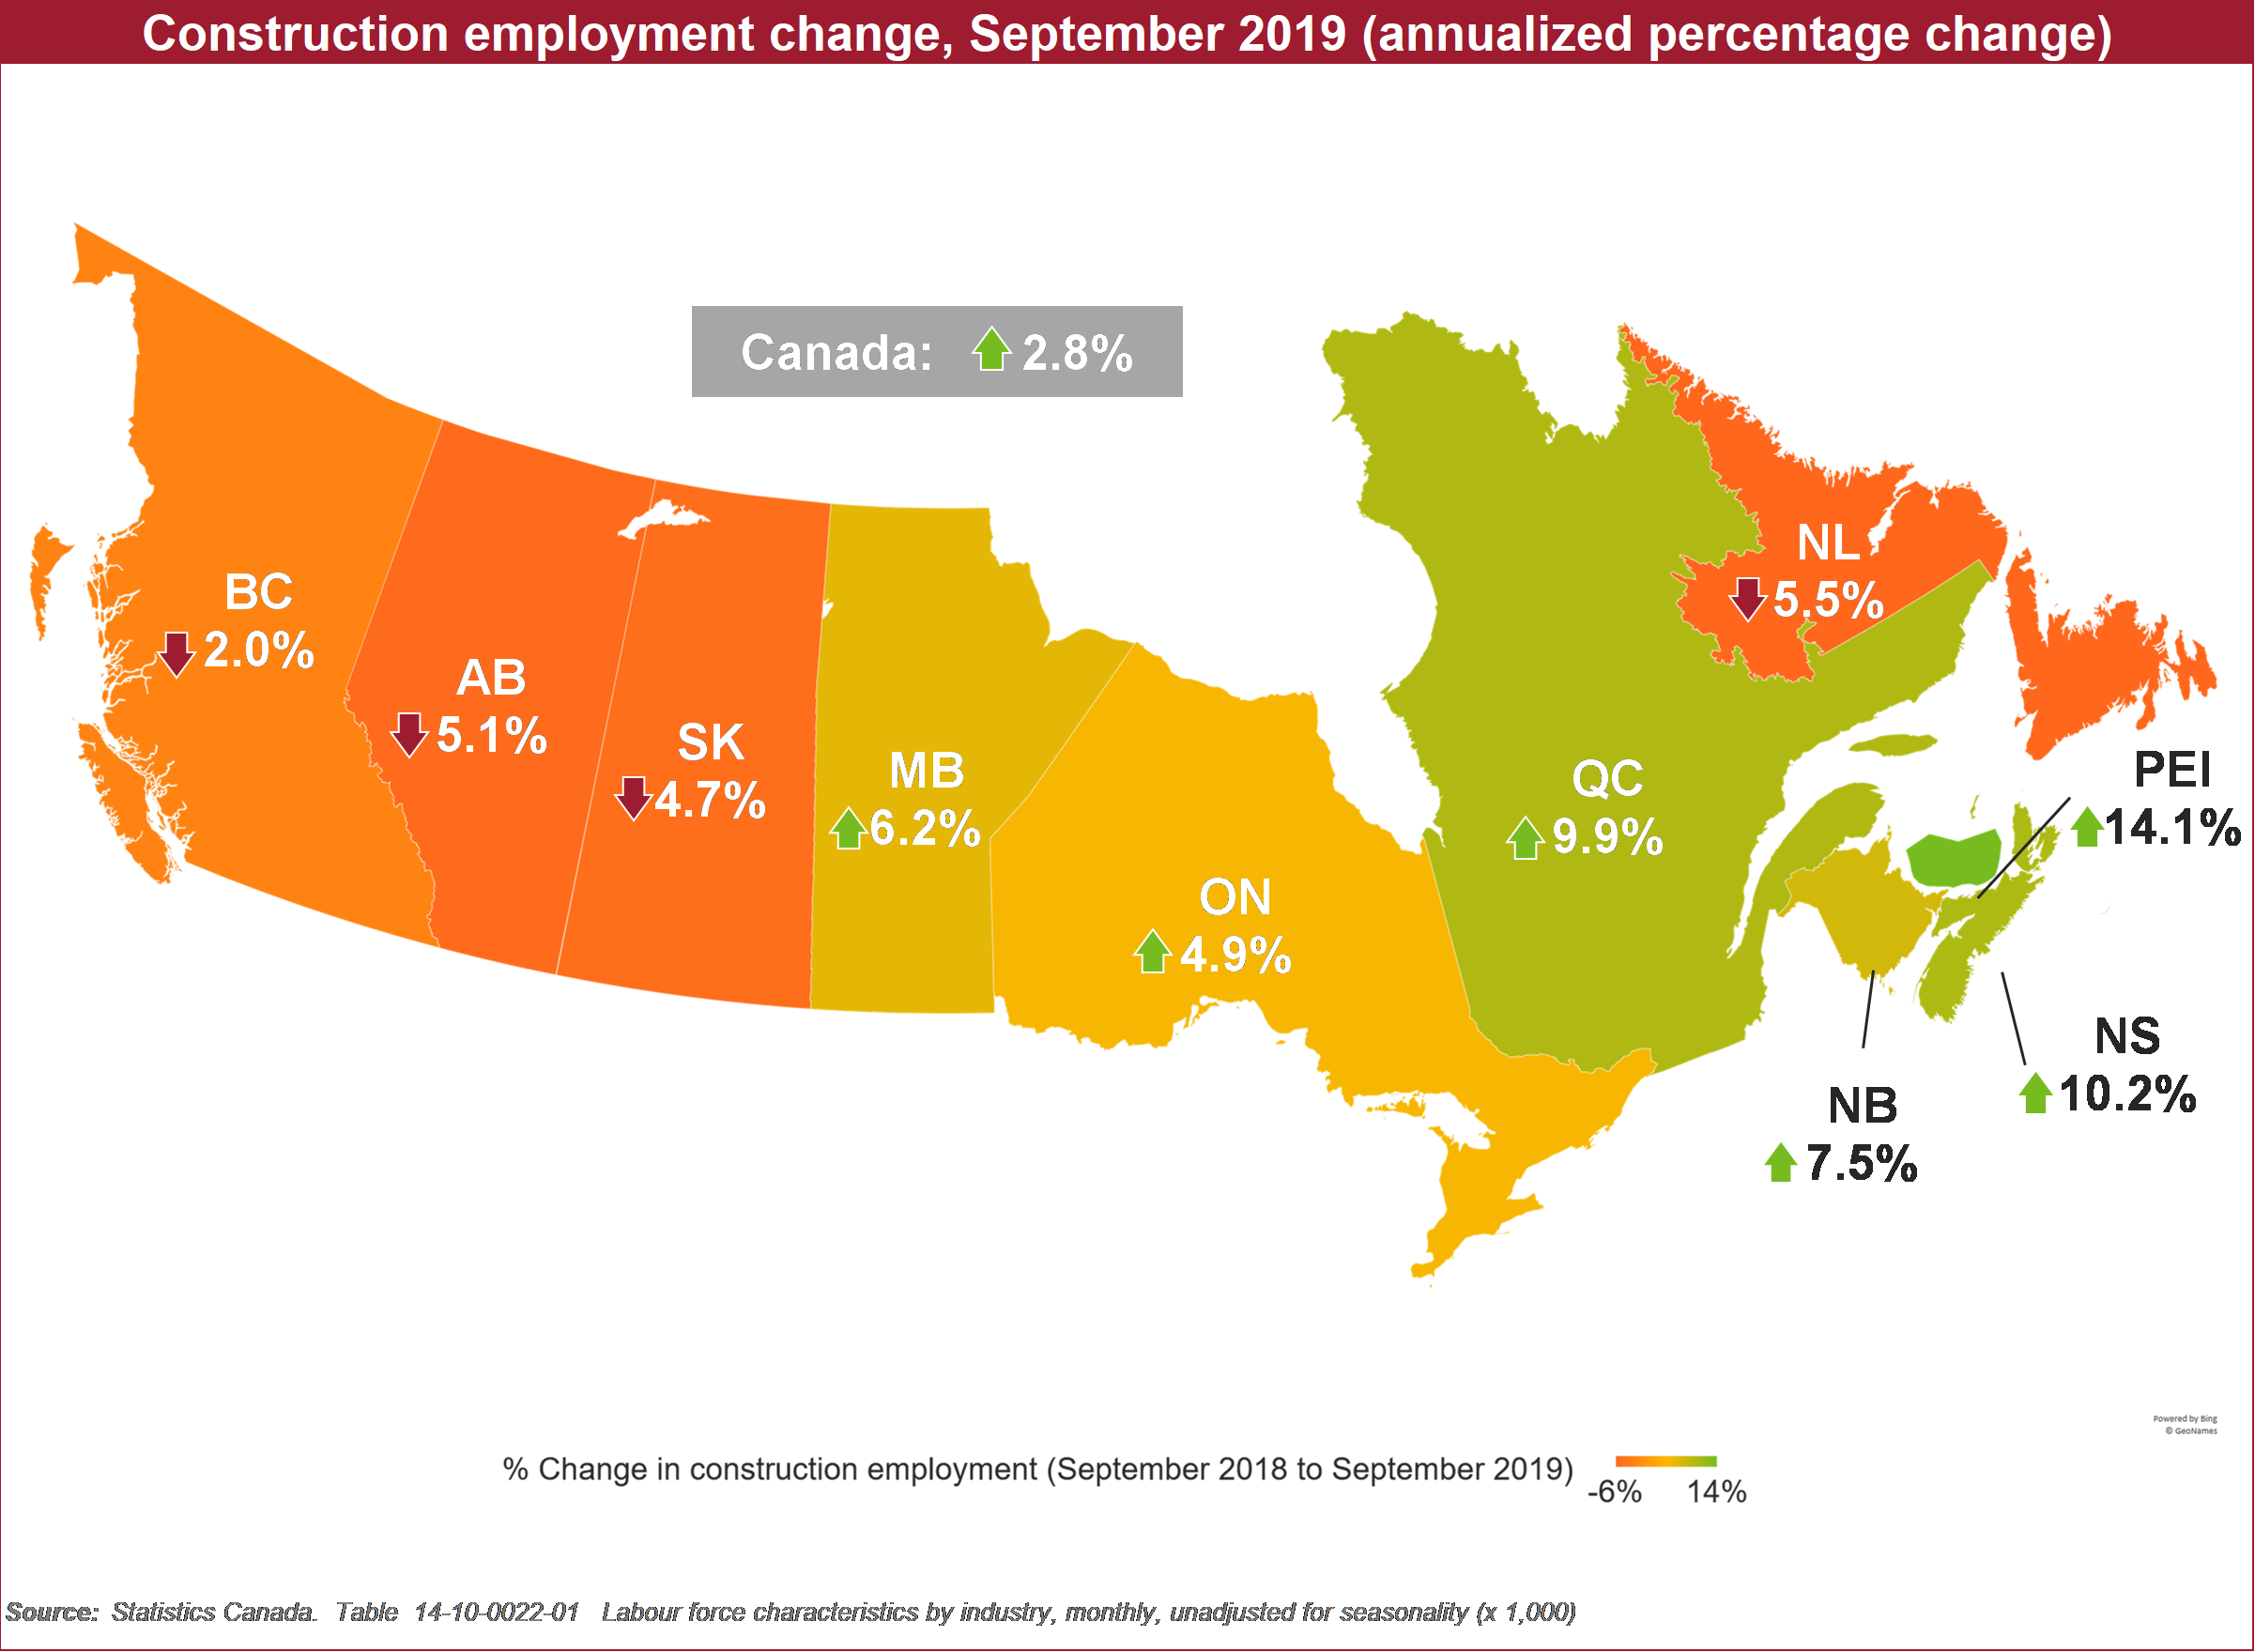 Map of Canada showing construction employment change, September 2019 (annualized percentage chance) by province